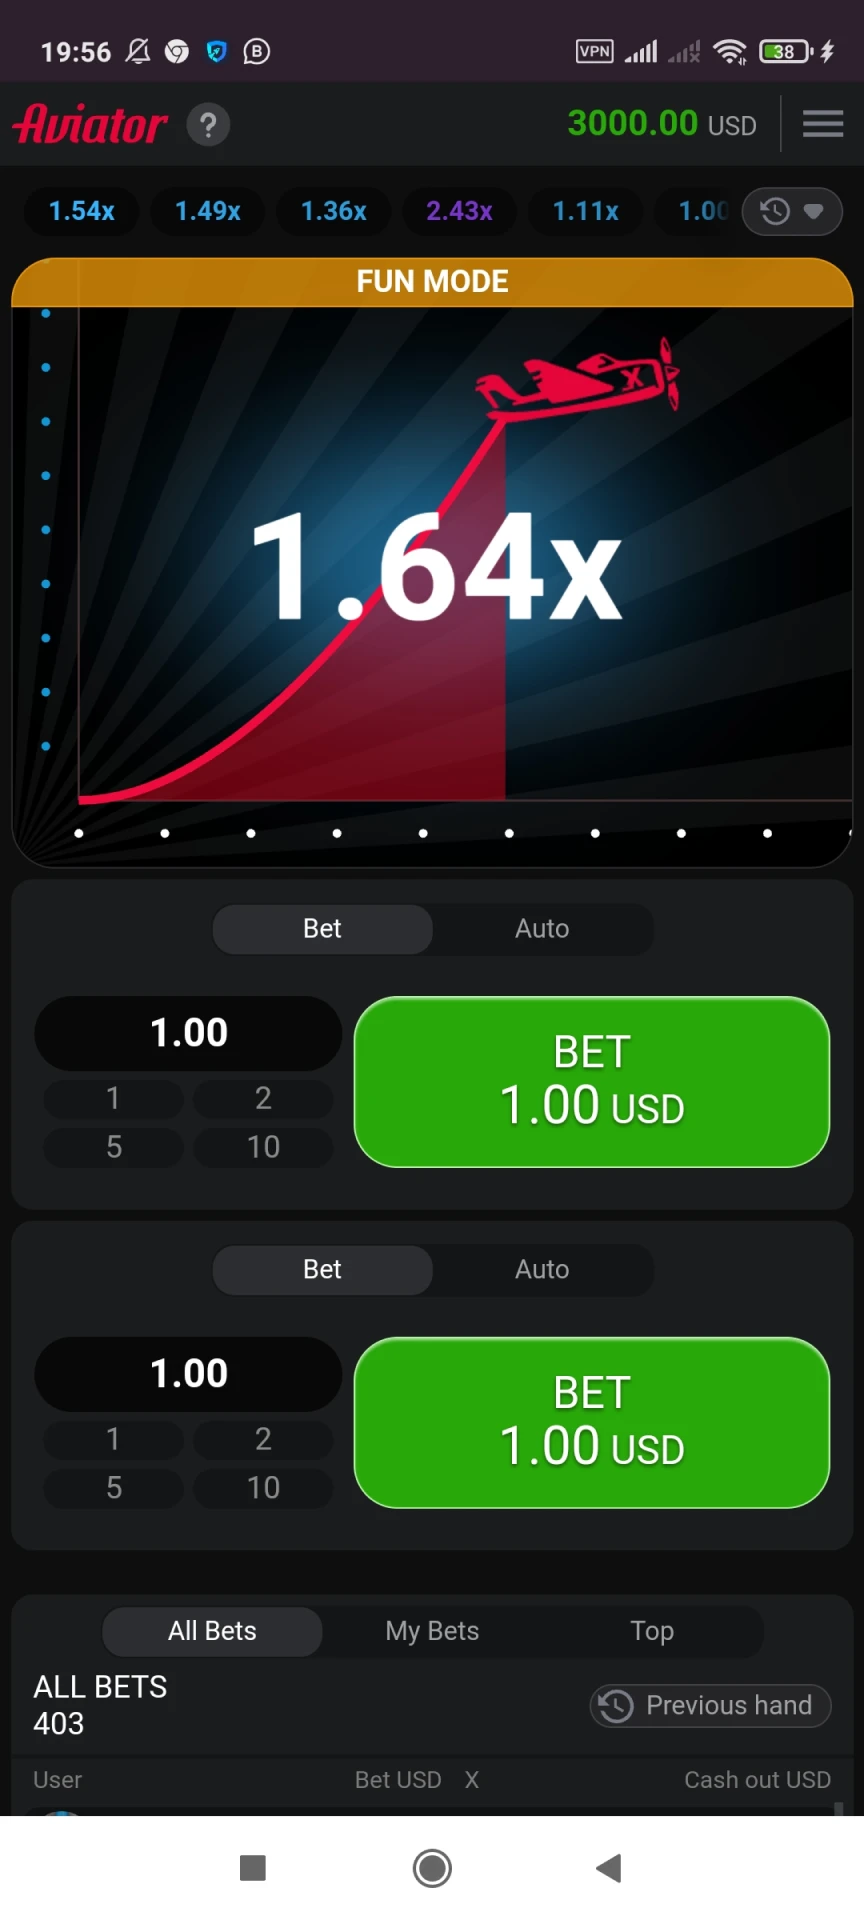 Visit the Aviator page in the Oshi Casino app.